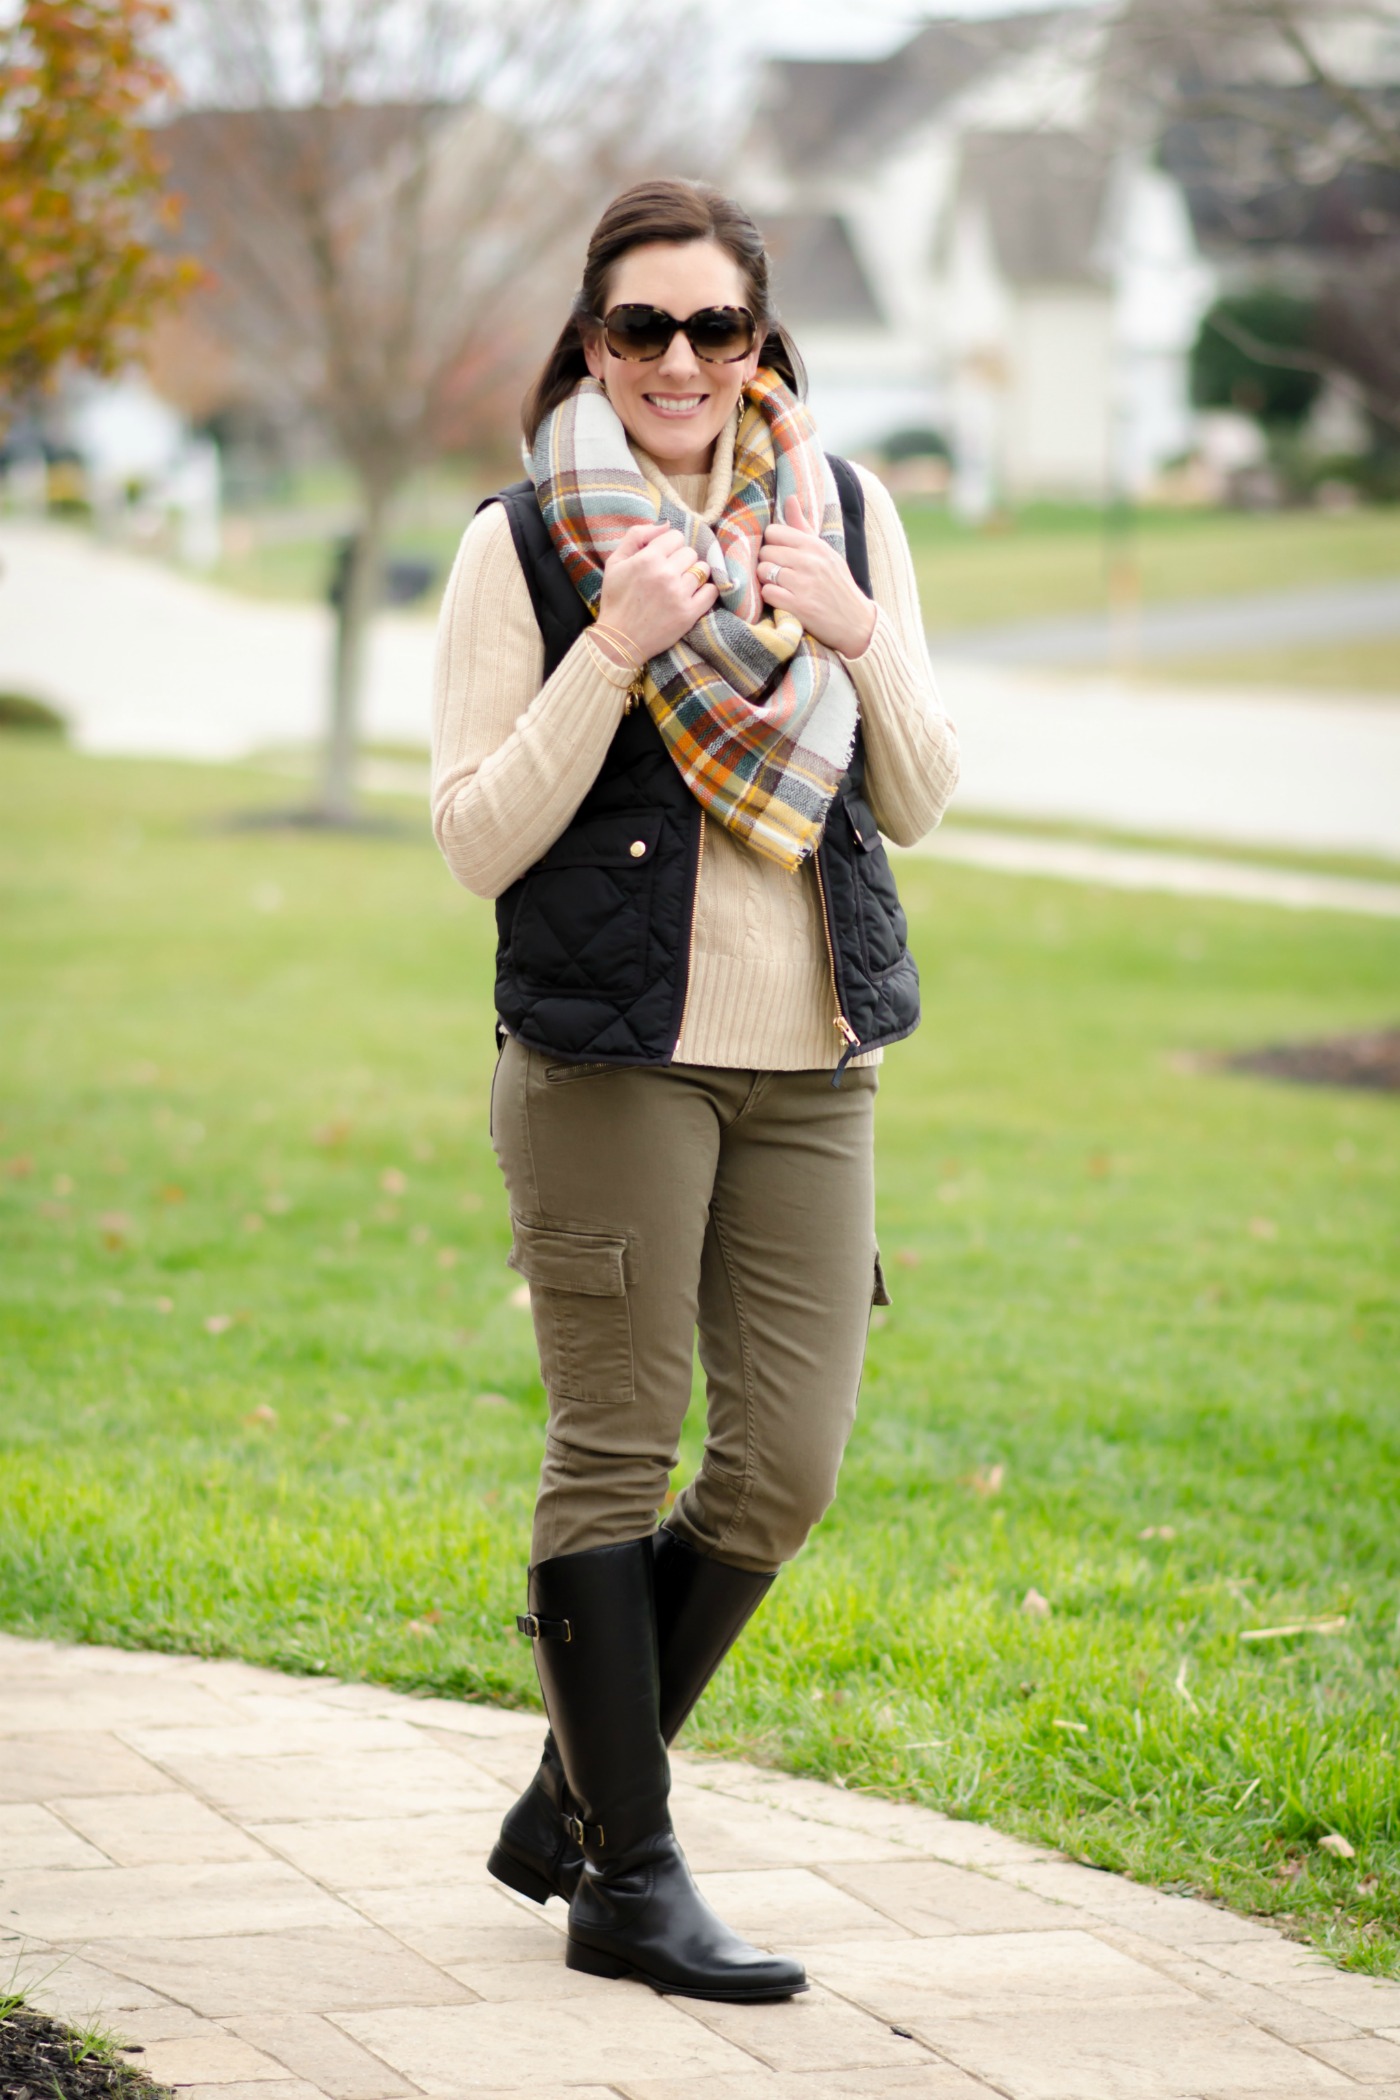 Down Vest with Blanket Scarf, Loden Cargo Skinnies, and Riding Boots